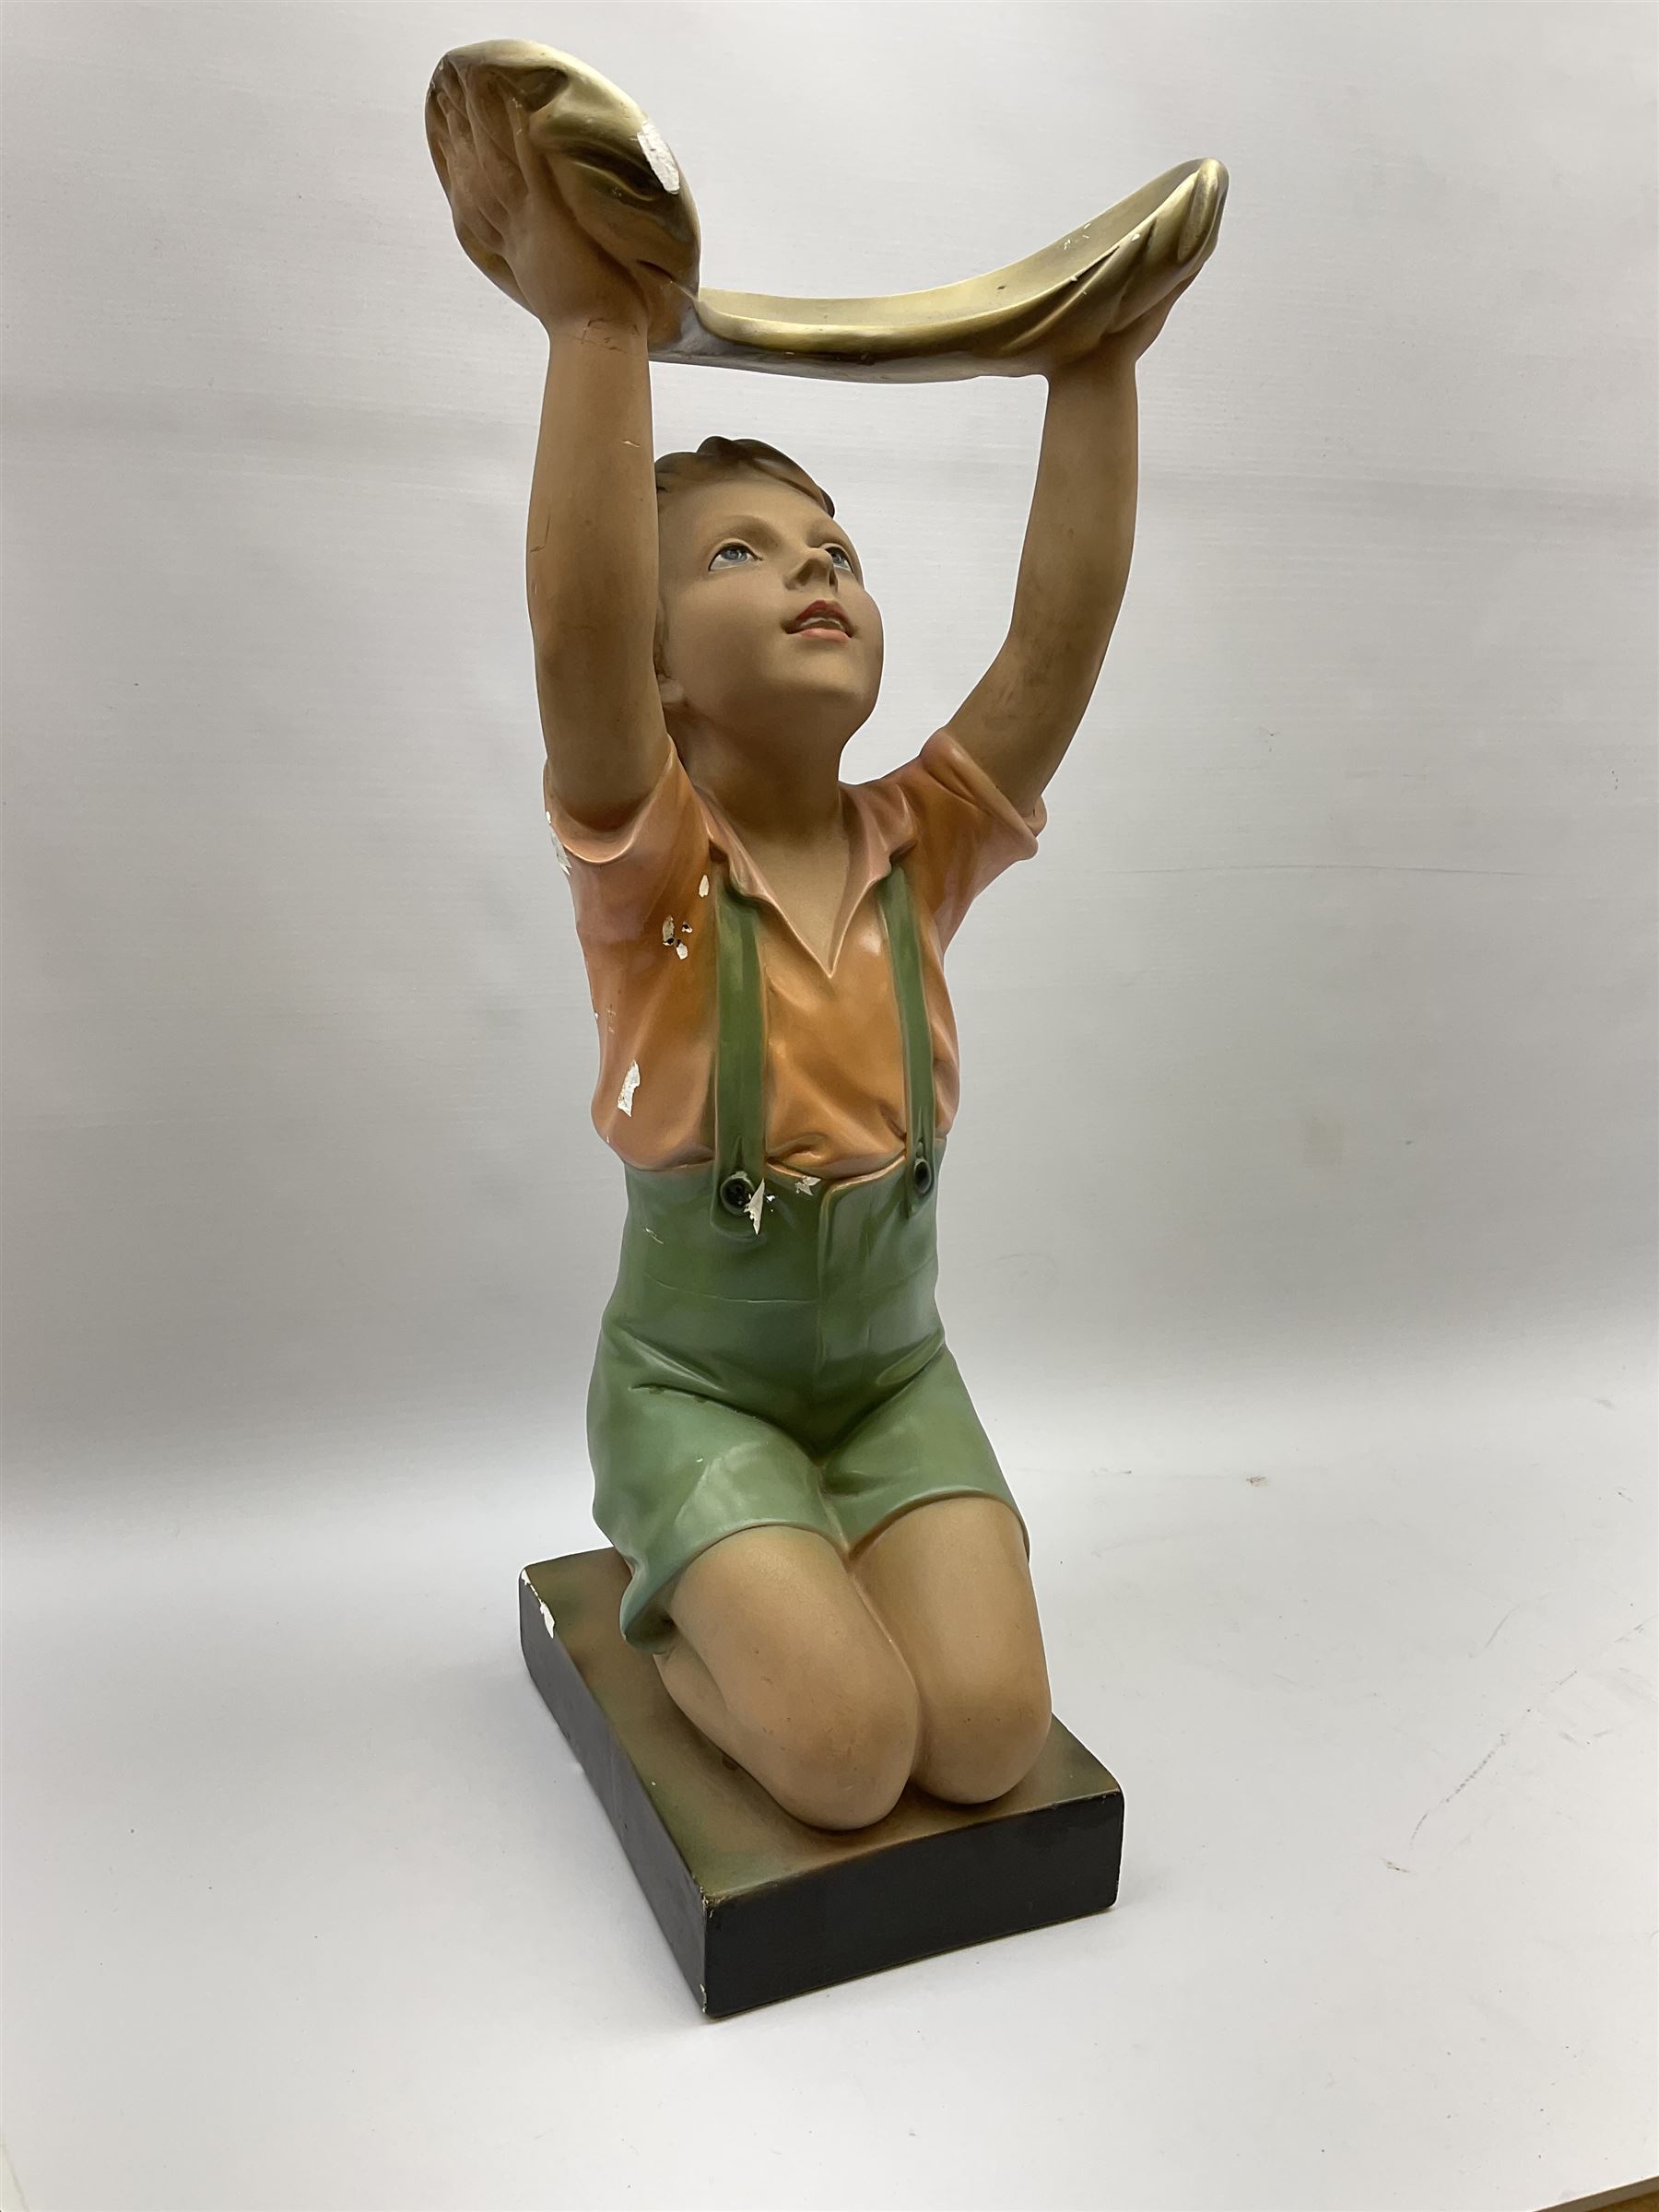 Art Deco plaster figure modelled as a young boy kneeling with his arms above his head holding a dish - Image 2 of 4